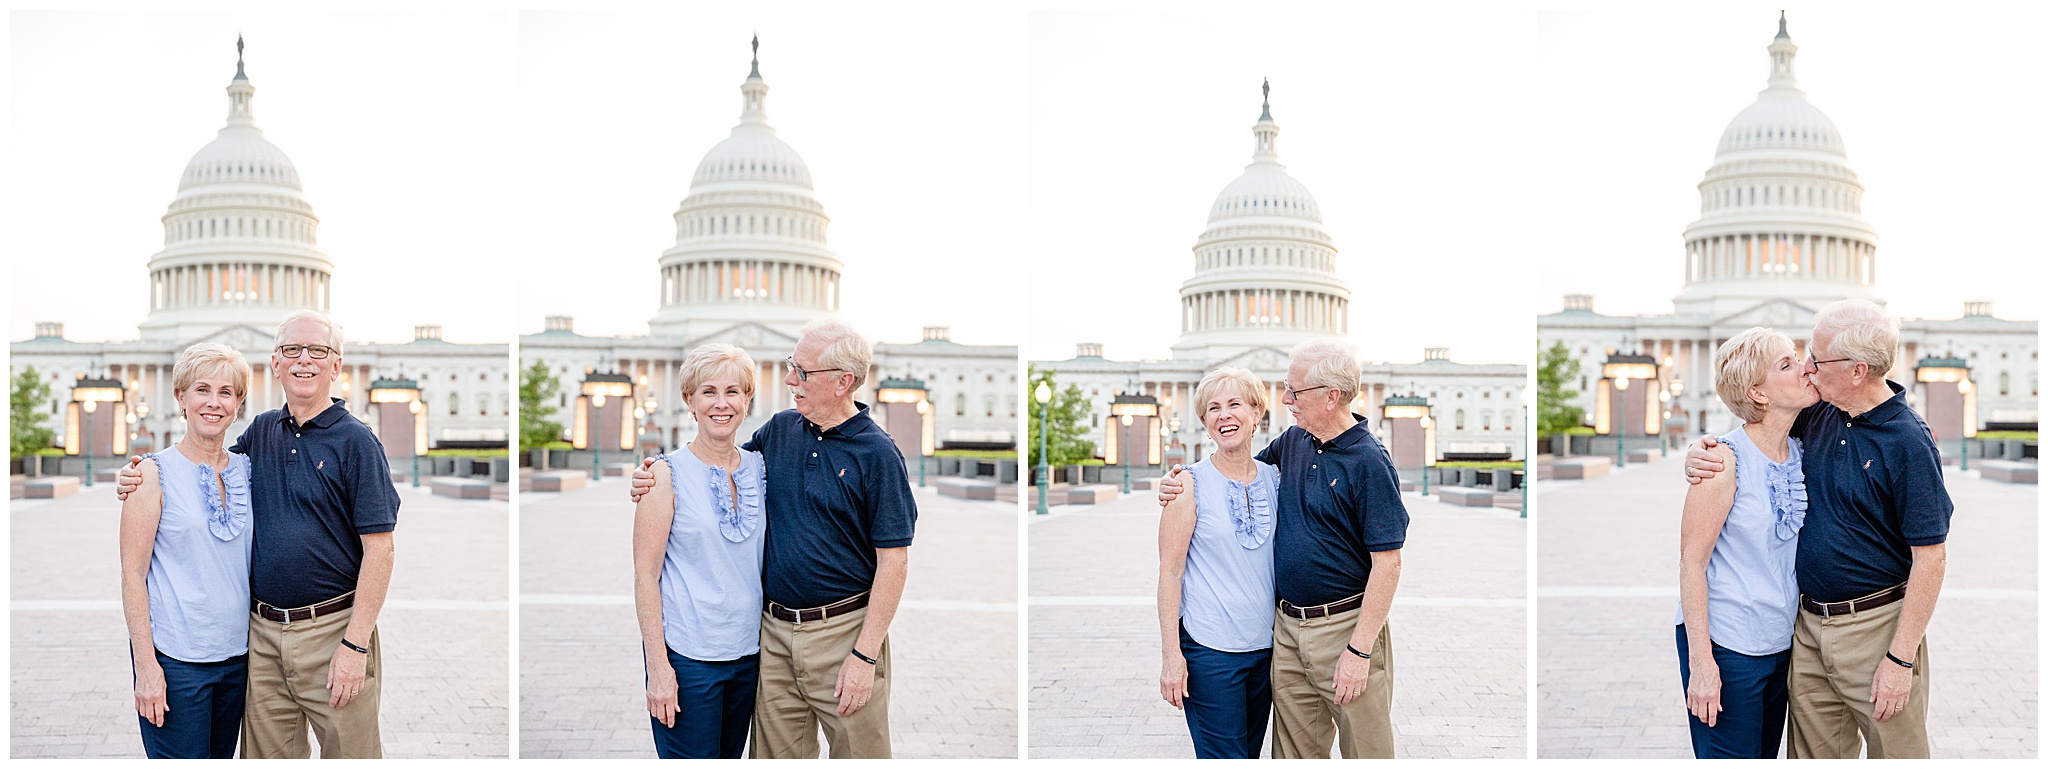 Grandparents Photo Session at the Capitol in Washington DC with Kofmehl Photography